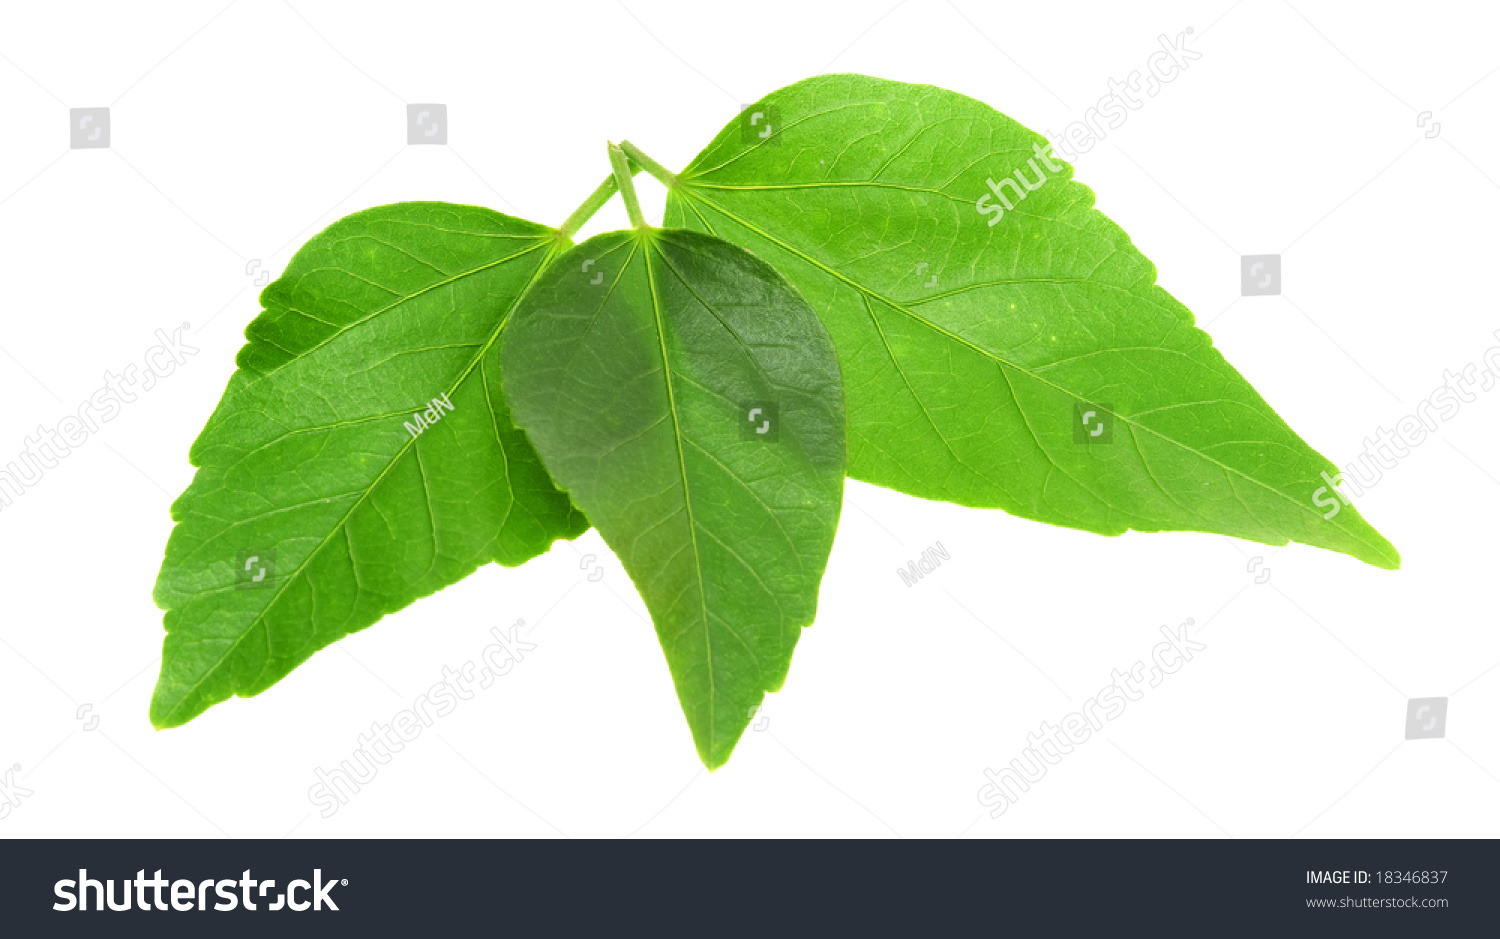 Hibiscus Leaves Stock Photo 18346837 : Shutterstock